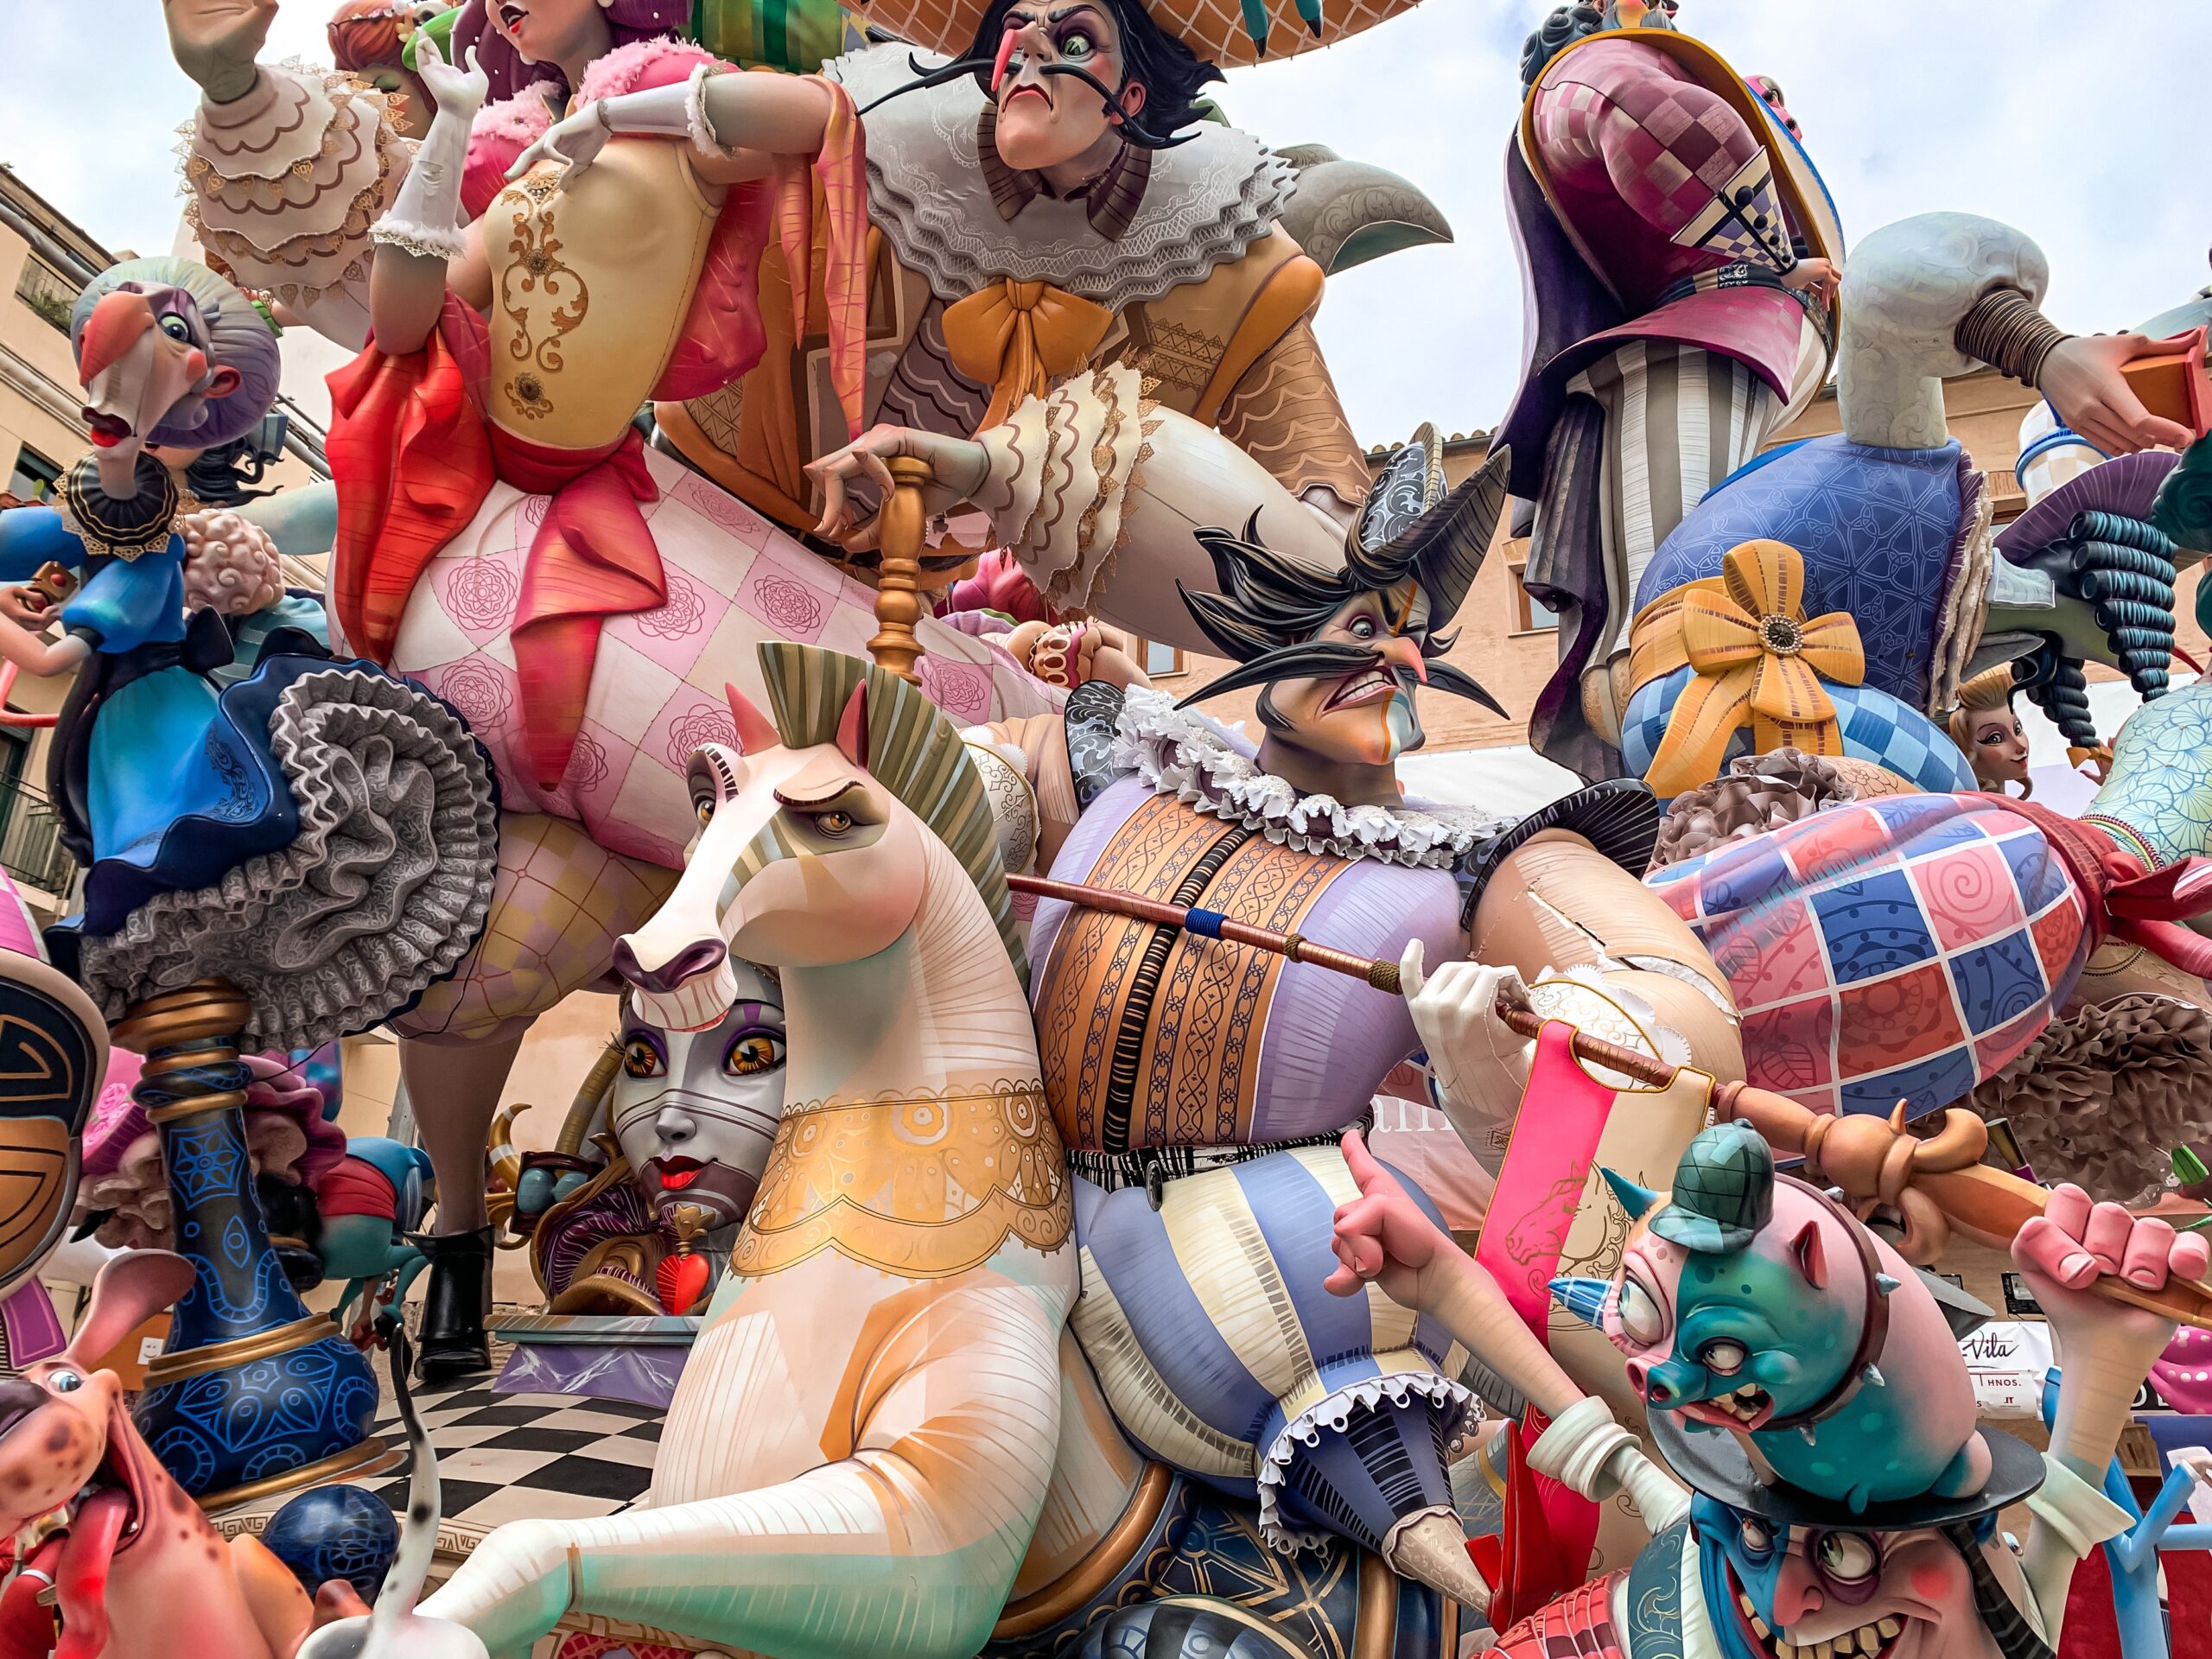 Close up of intricate paper cache figurines including horses and humans, from Las Fallas spring festivals